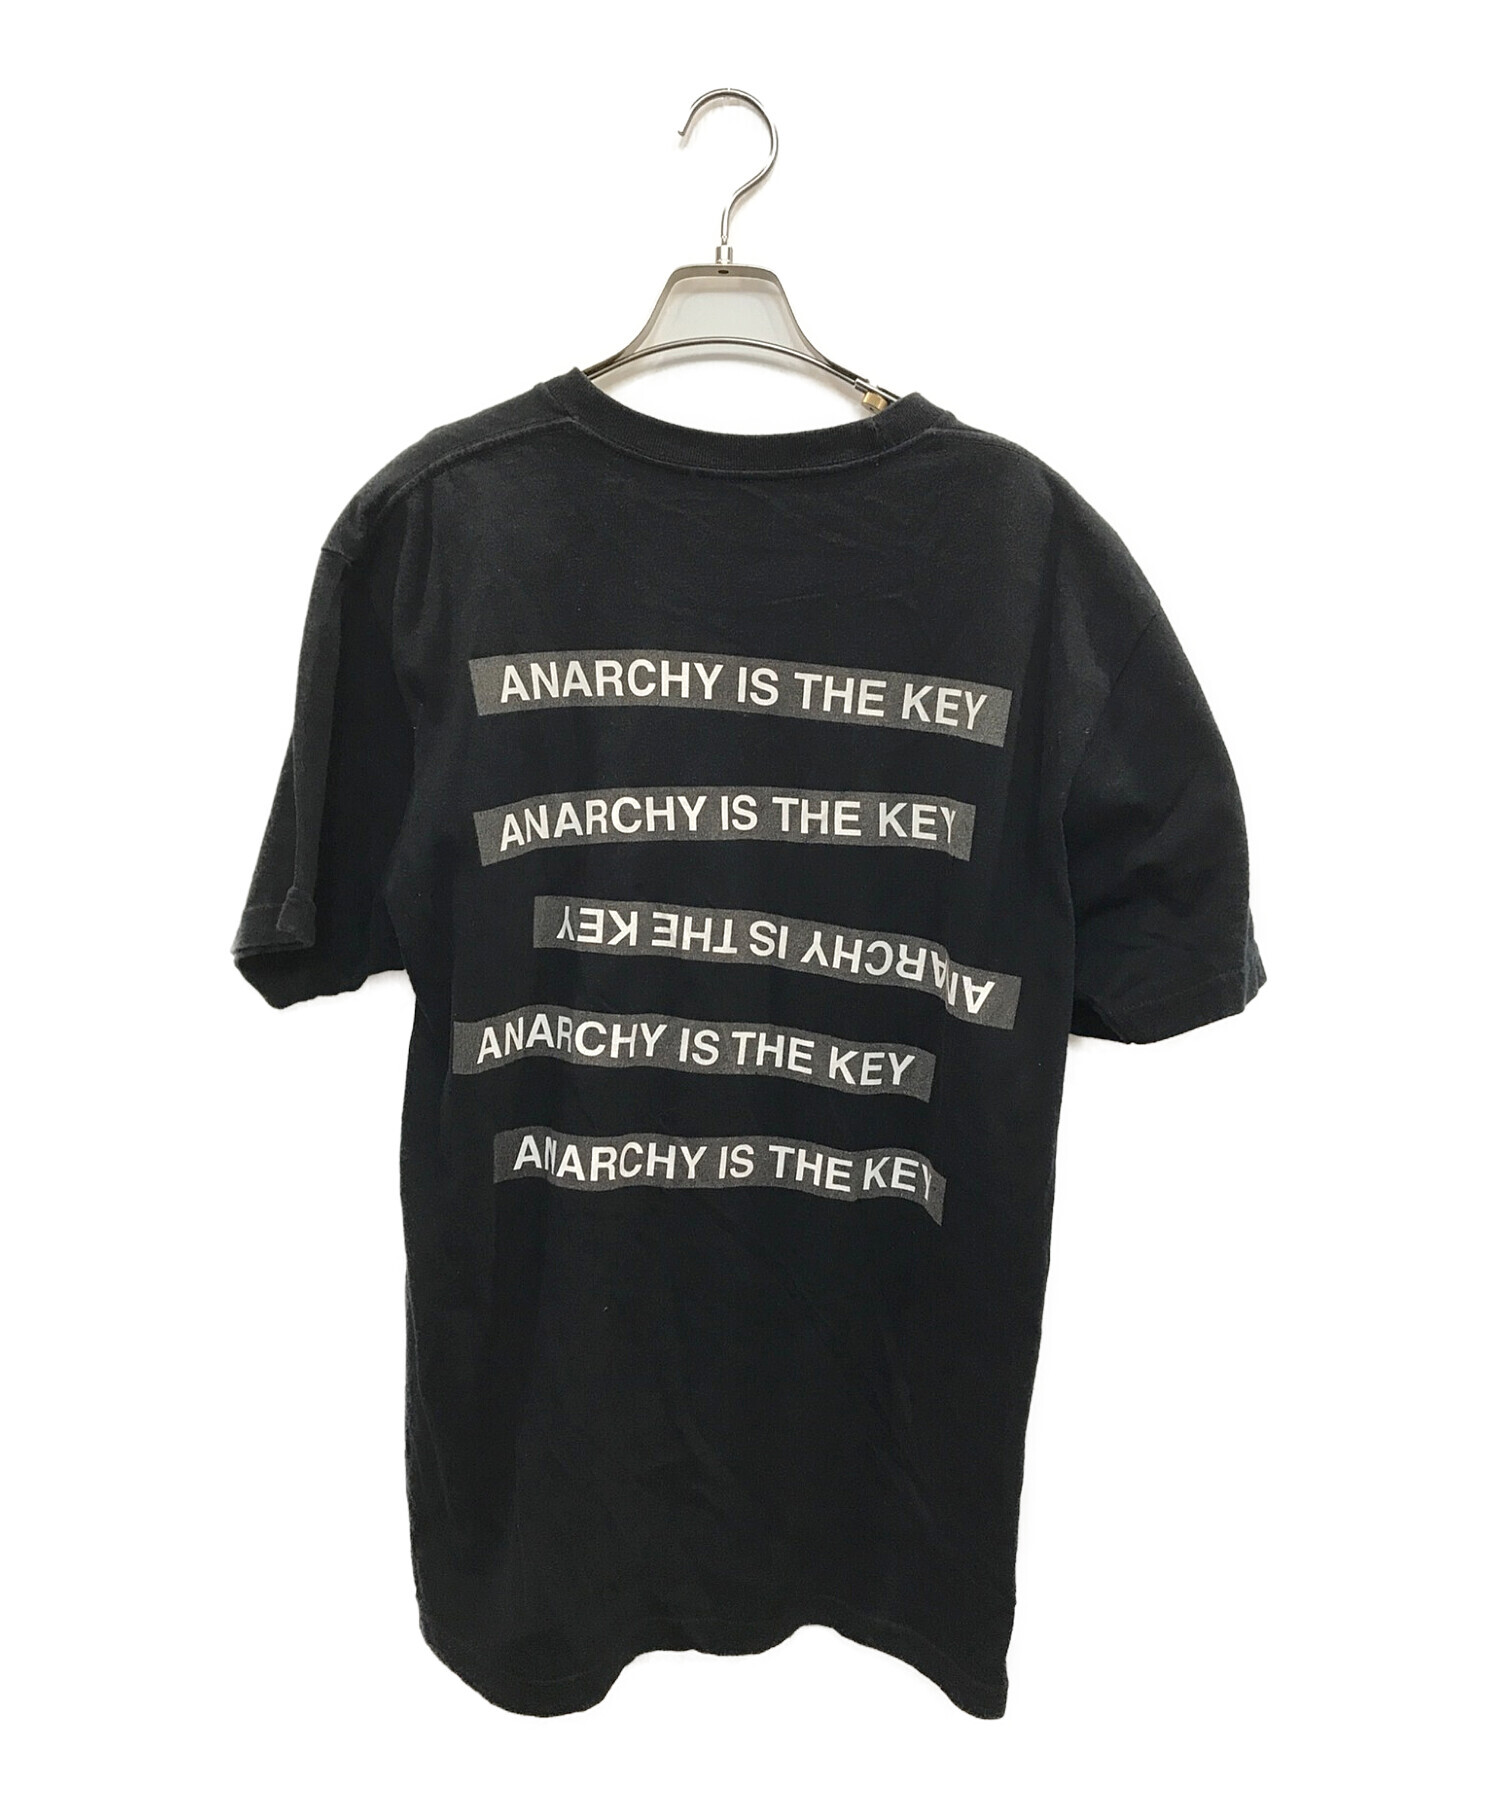 Tシャツ/カットソー(半袖/袖なし)Supreme x Undercover Anarchy Tee